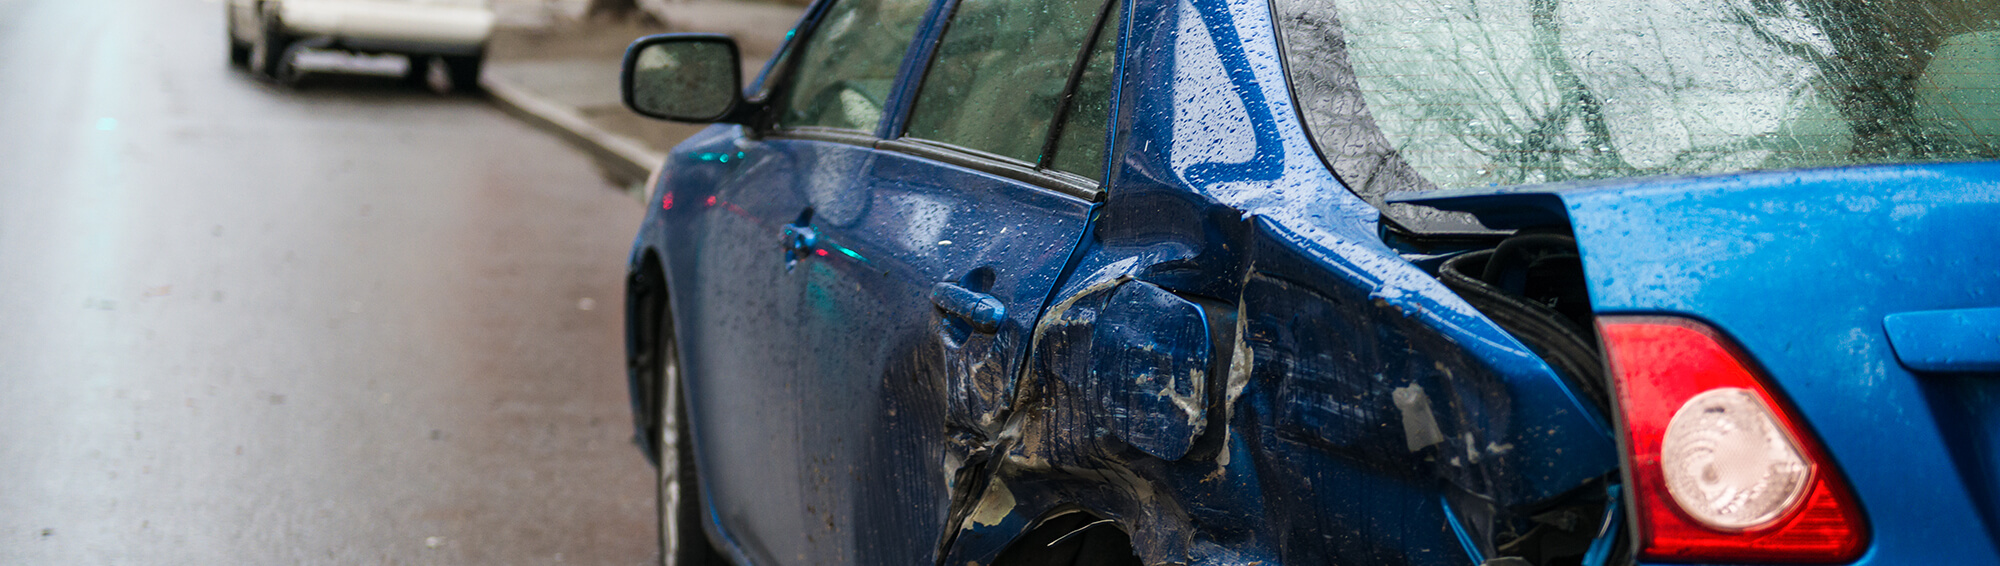 Rental Car Accidents Are Complex. Get a Law Firm That Knows the Laws.